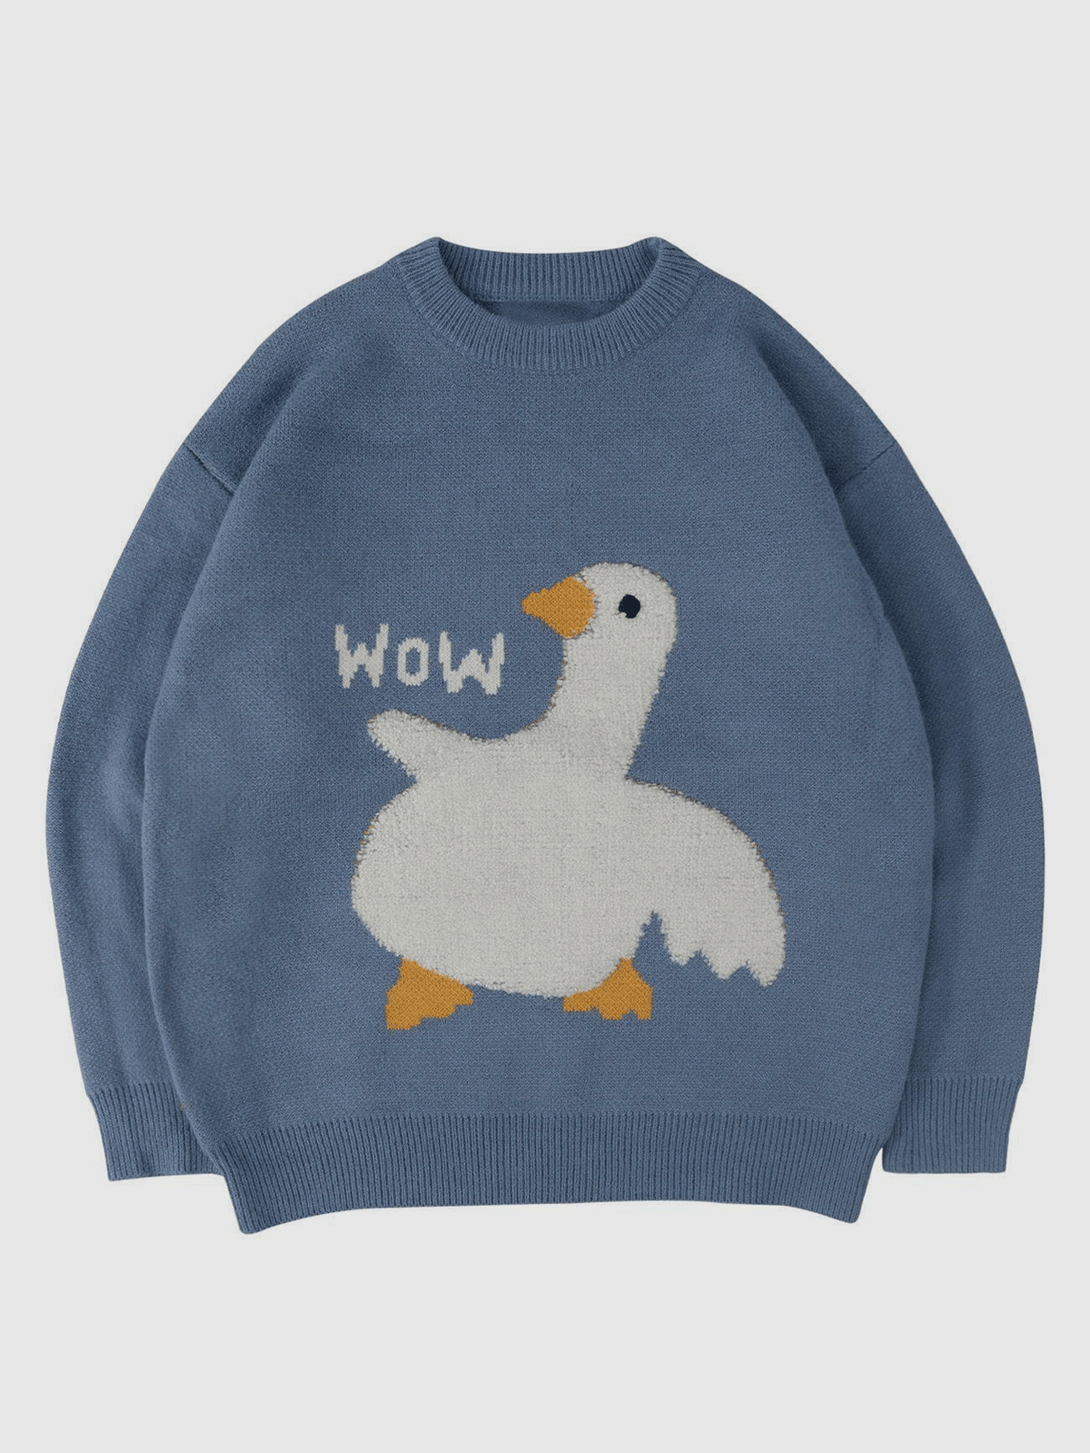 Levefly - Wow Goose Sweater - Streetwear Fashion - levefly.com